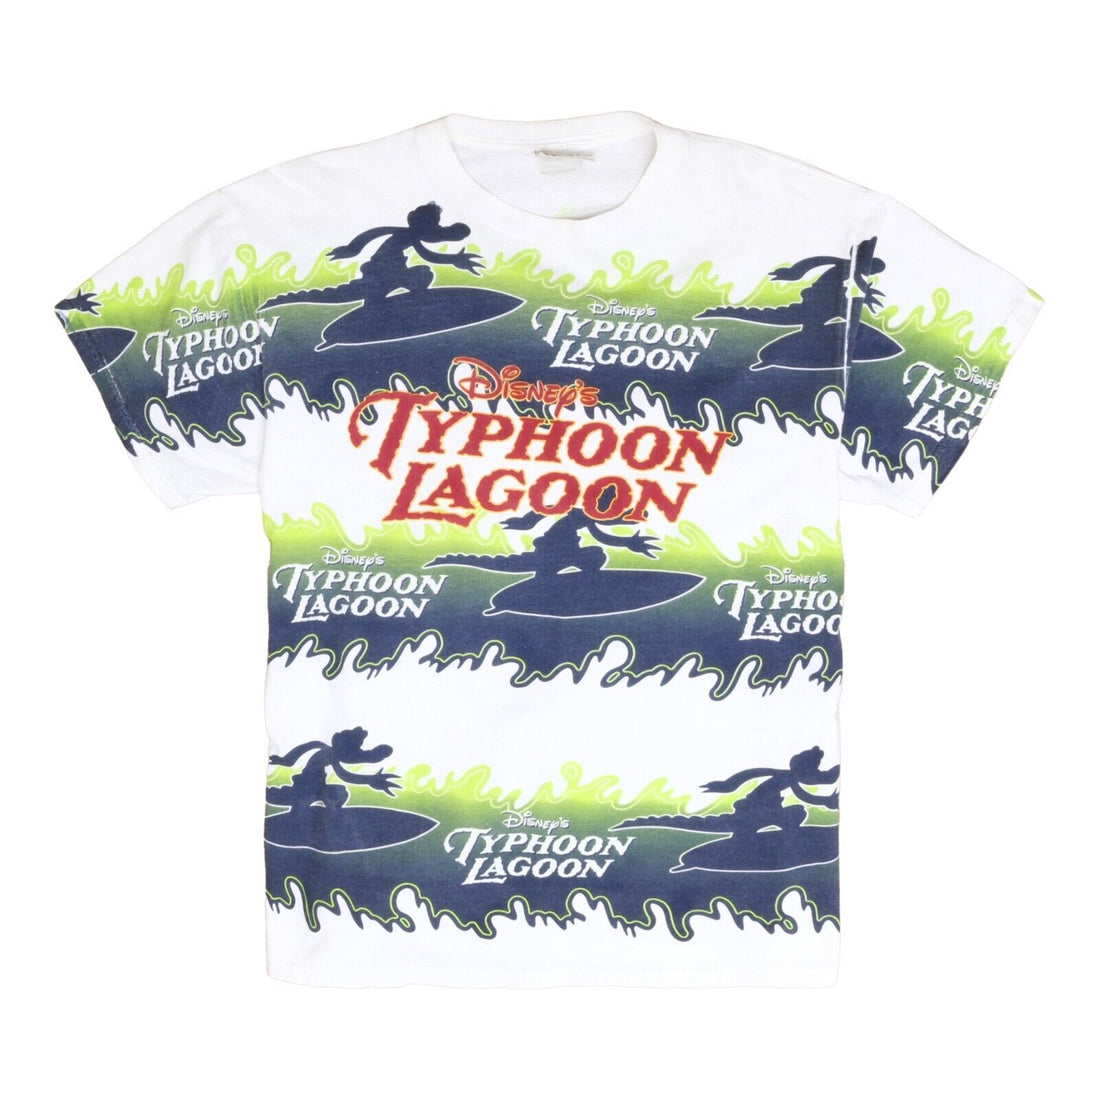 Vintage Disney's Typhoon Lagoon Water Park T-Shirt Size Large All Over Print AOP